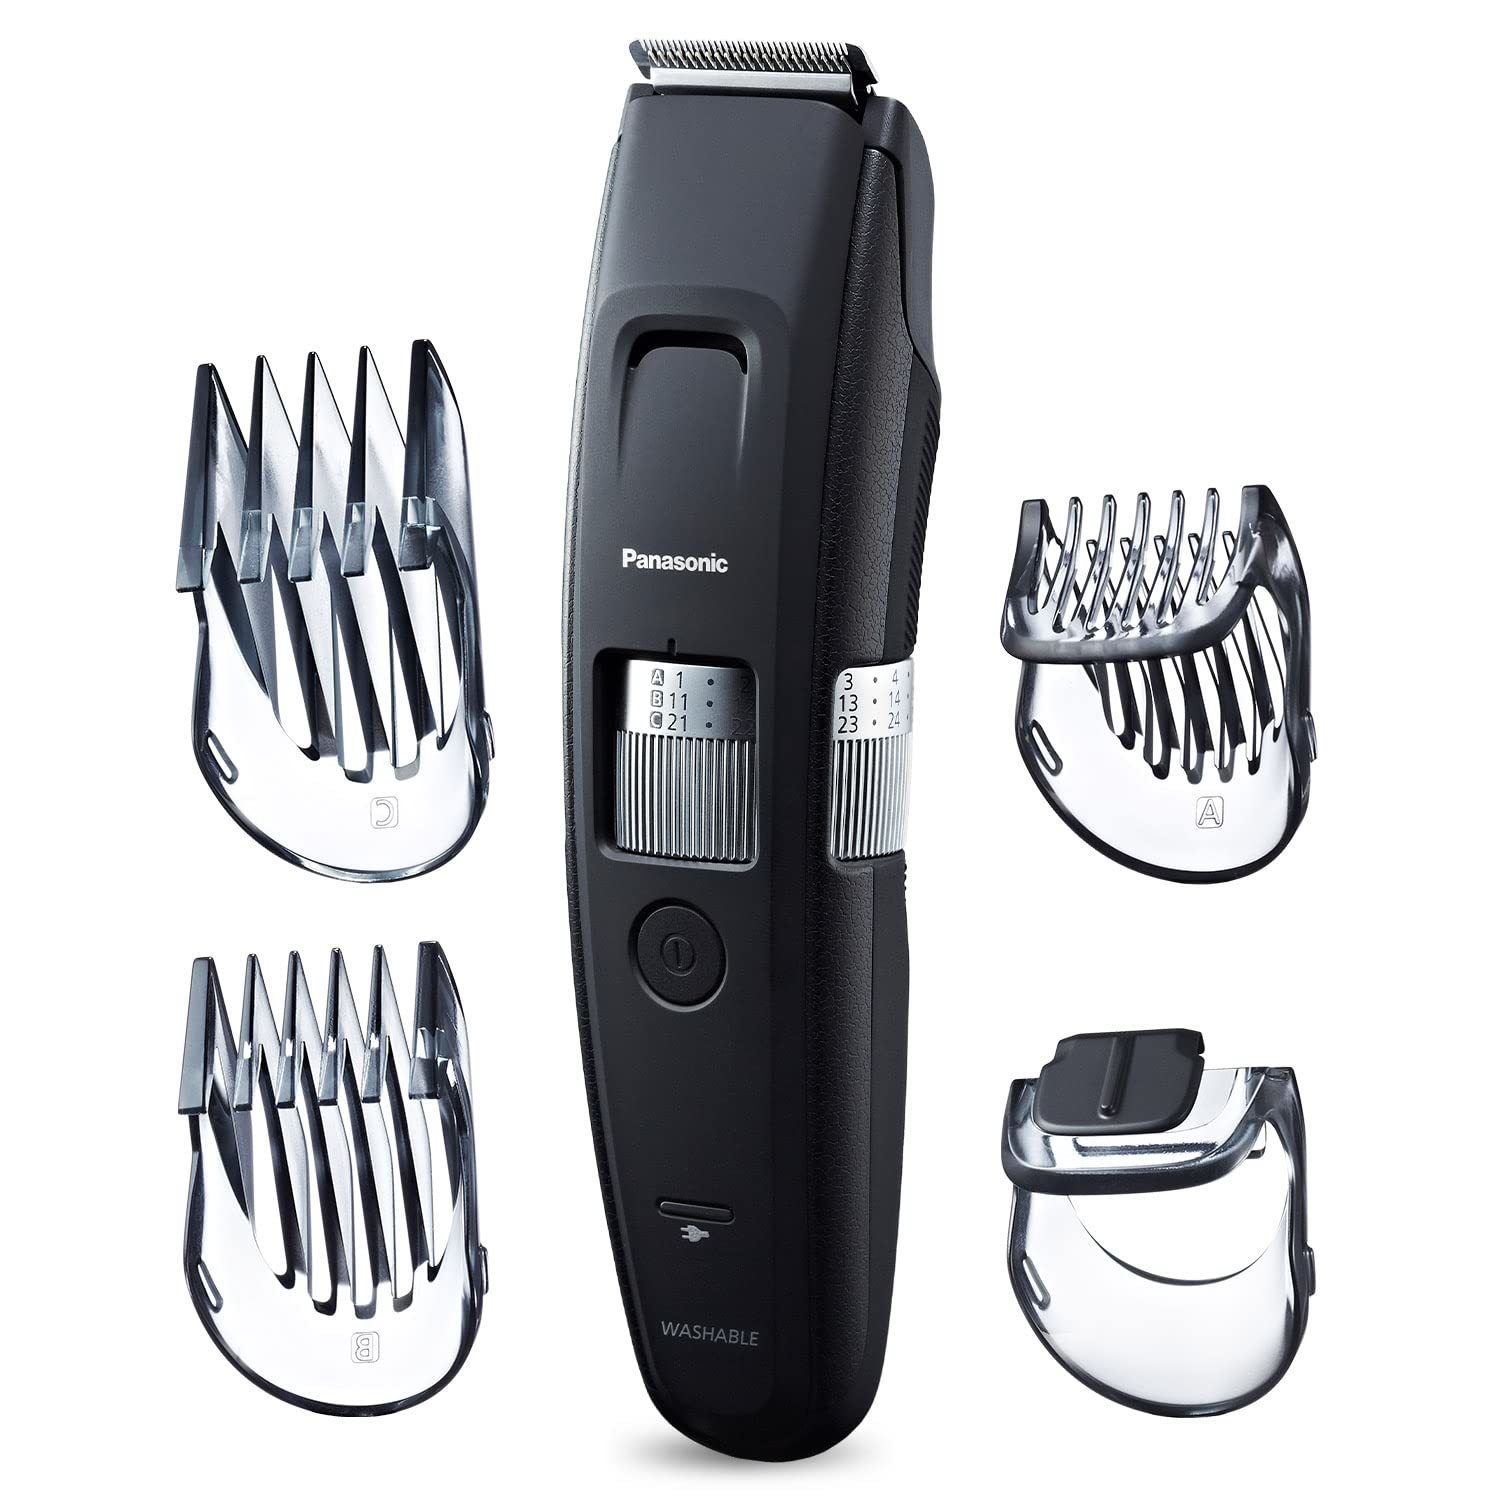 Panasonic Long Beard Trimmer for Men, 58 Length Settings and 4 Attachments for - $90.99